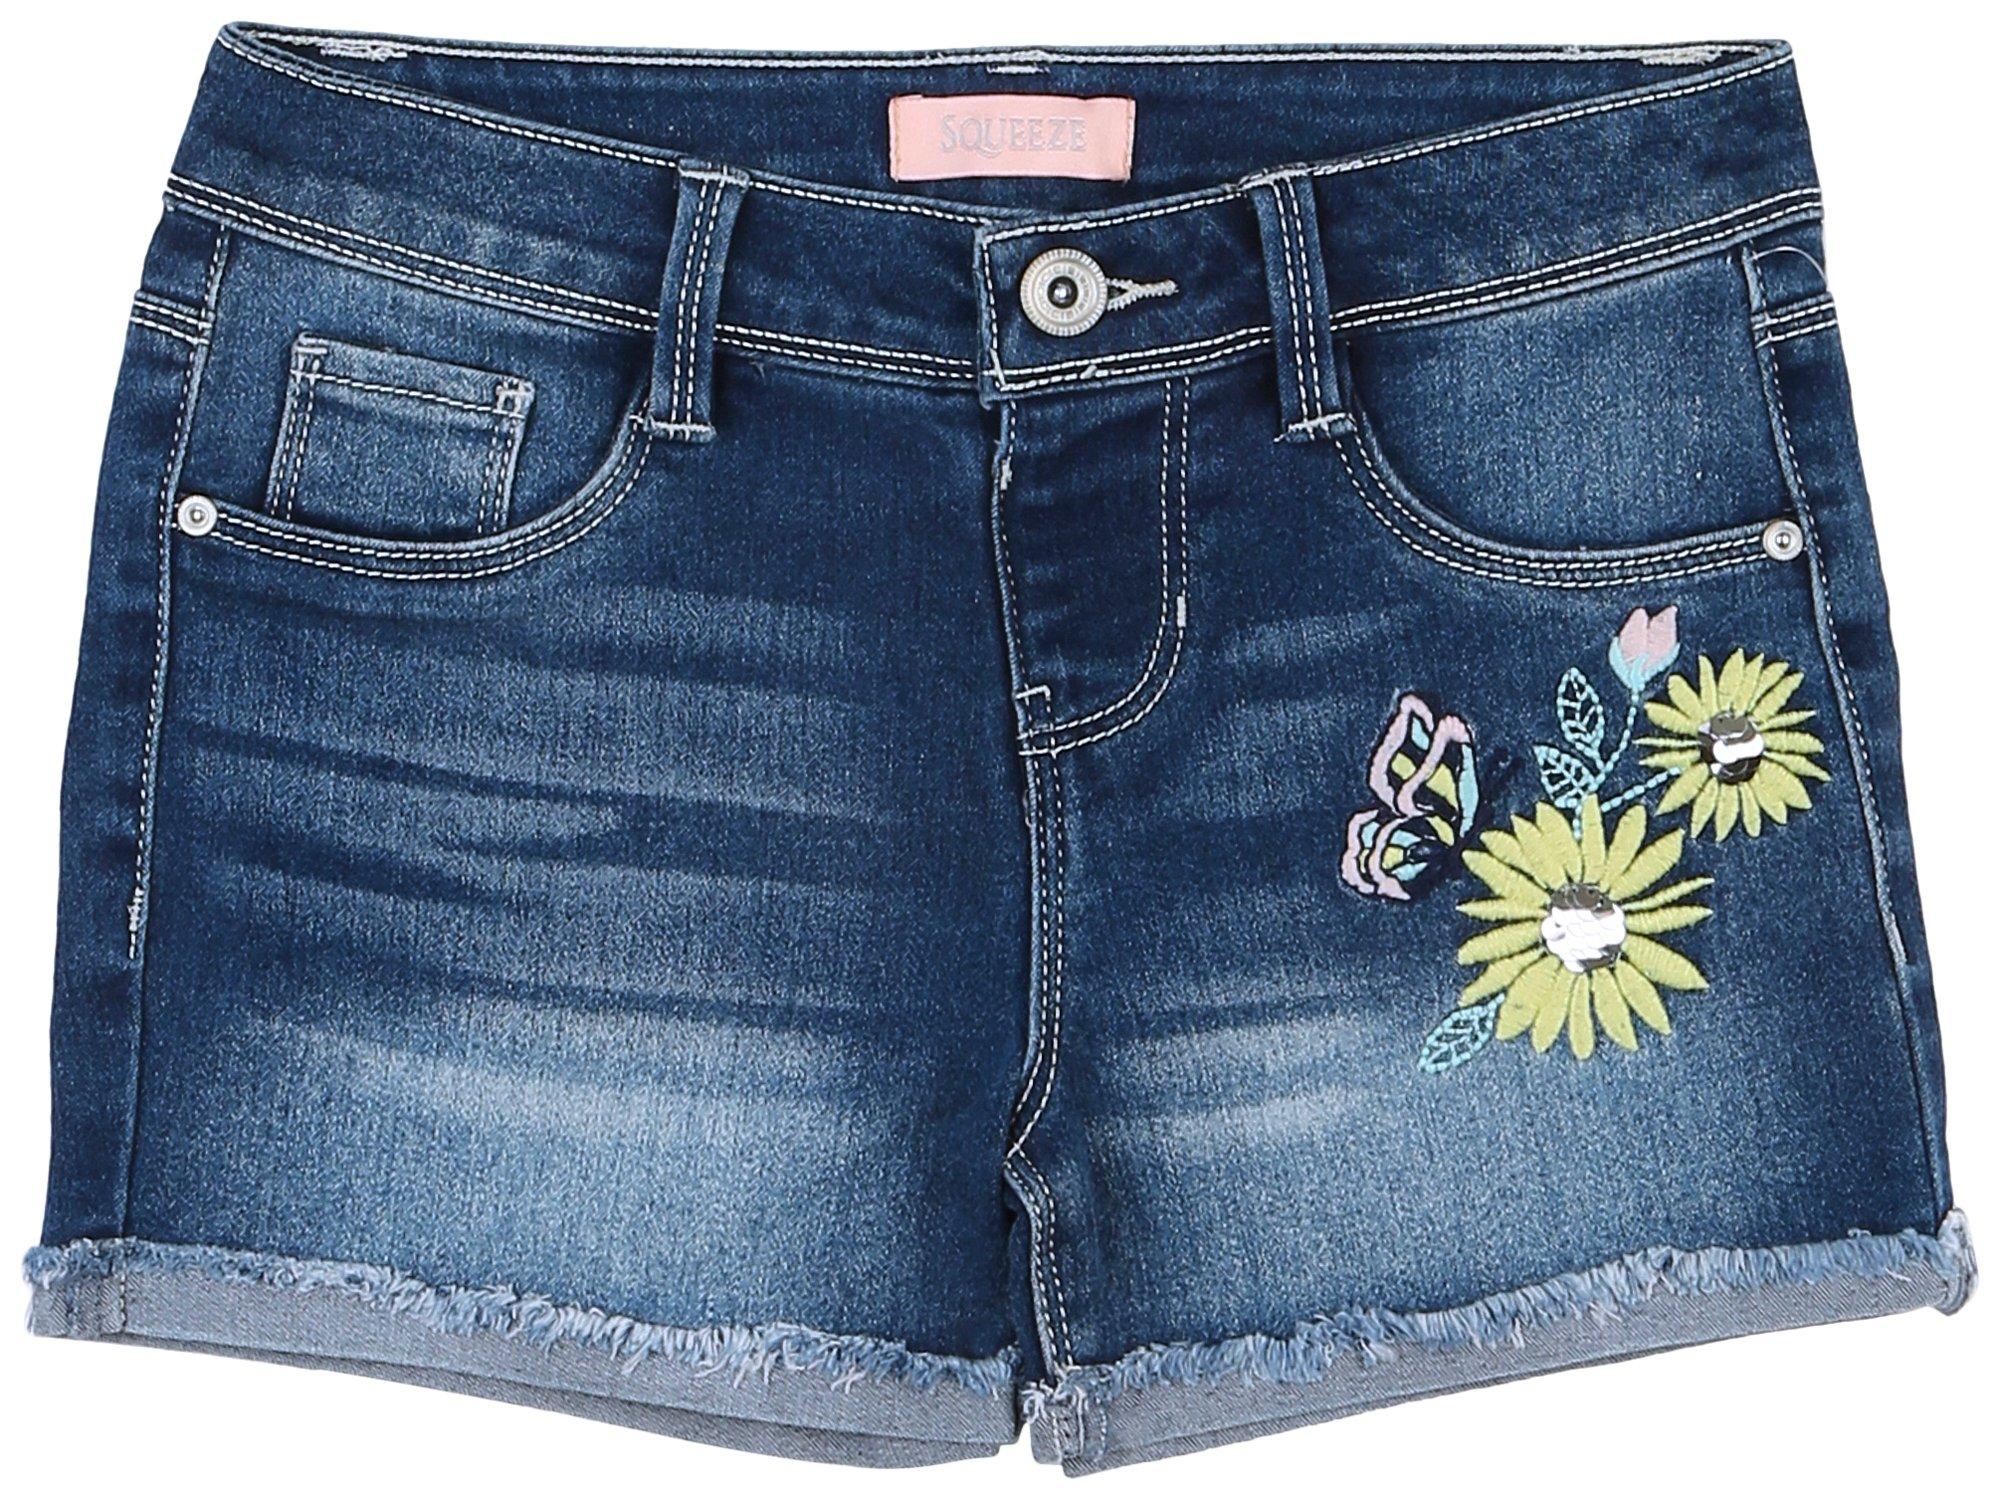 Squeeze Big Girls Embroidered Floral Denim Shorts